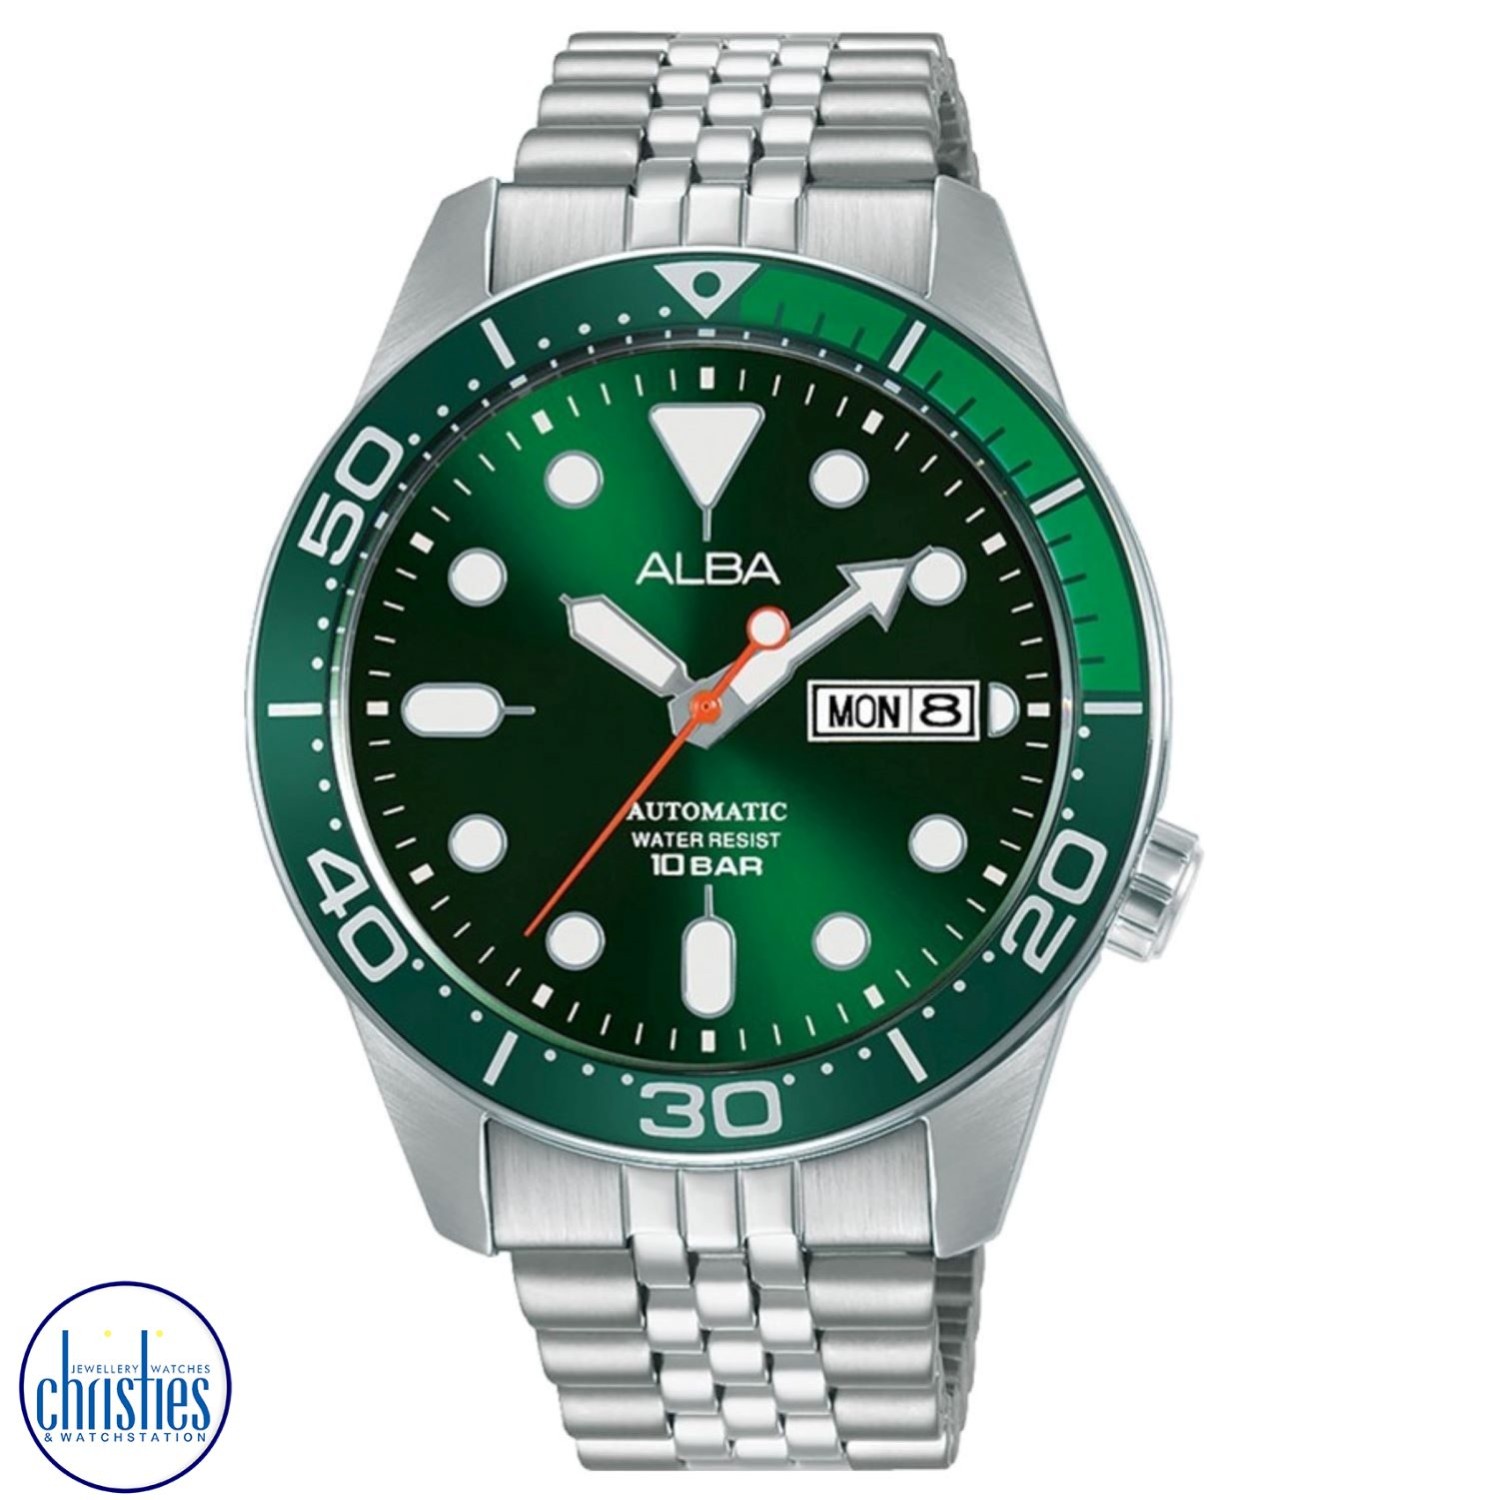 AL4187X1-ALBA MENS GREEN  DIAL AUTOMATIC WATCH. unique engagement rings nz  Alba AL4187X1  is an elegant and stylish mens analog watch that combines classic design with modern technology.